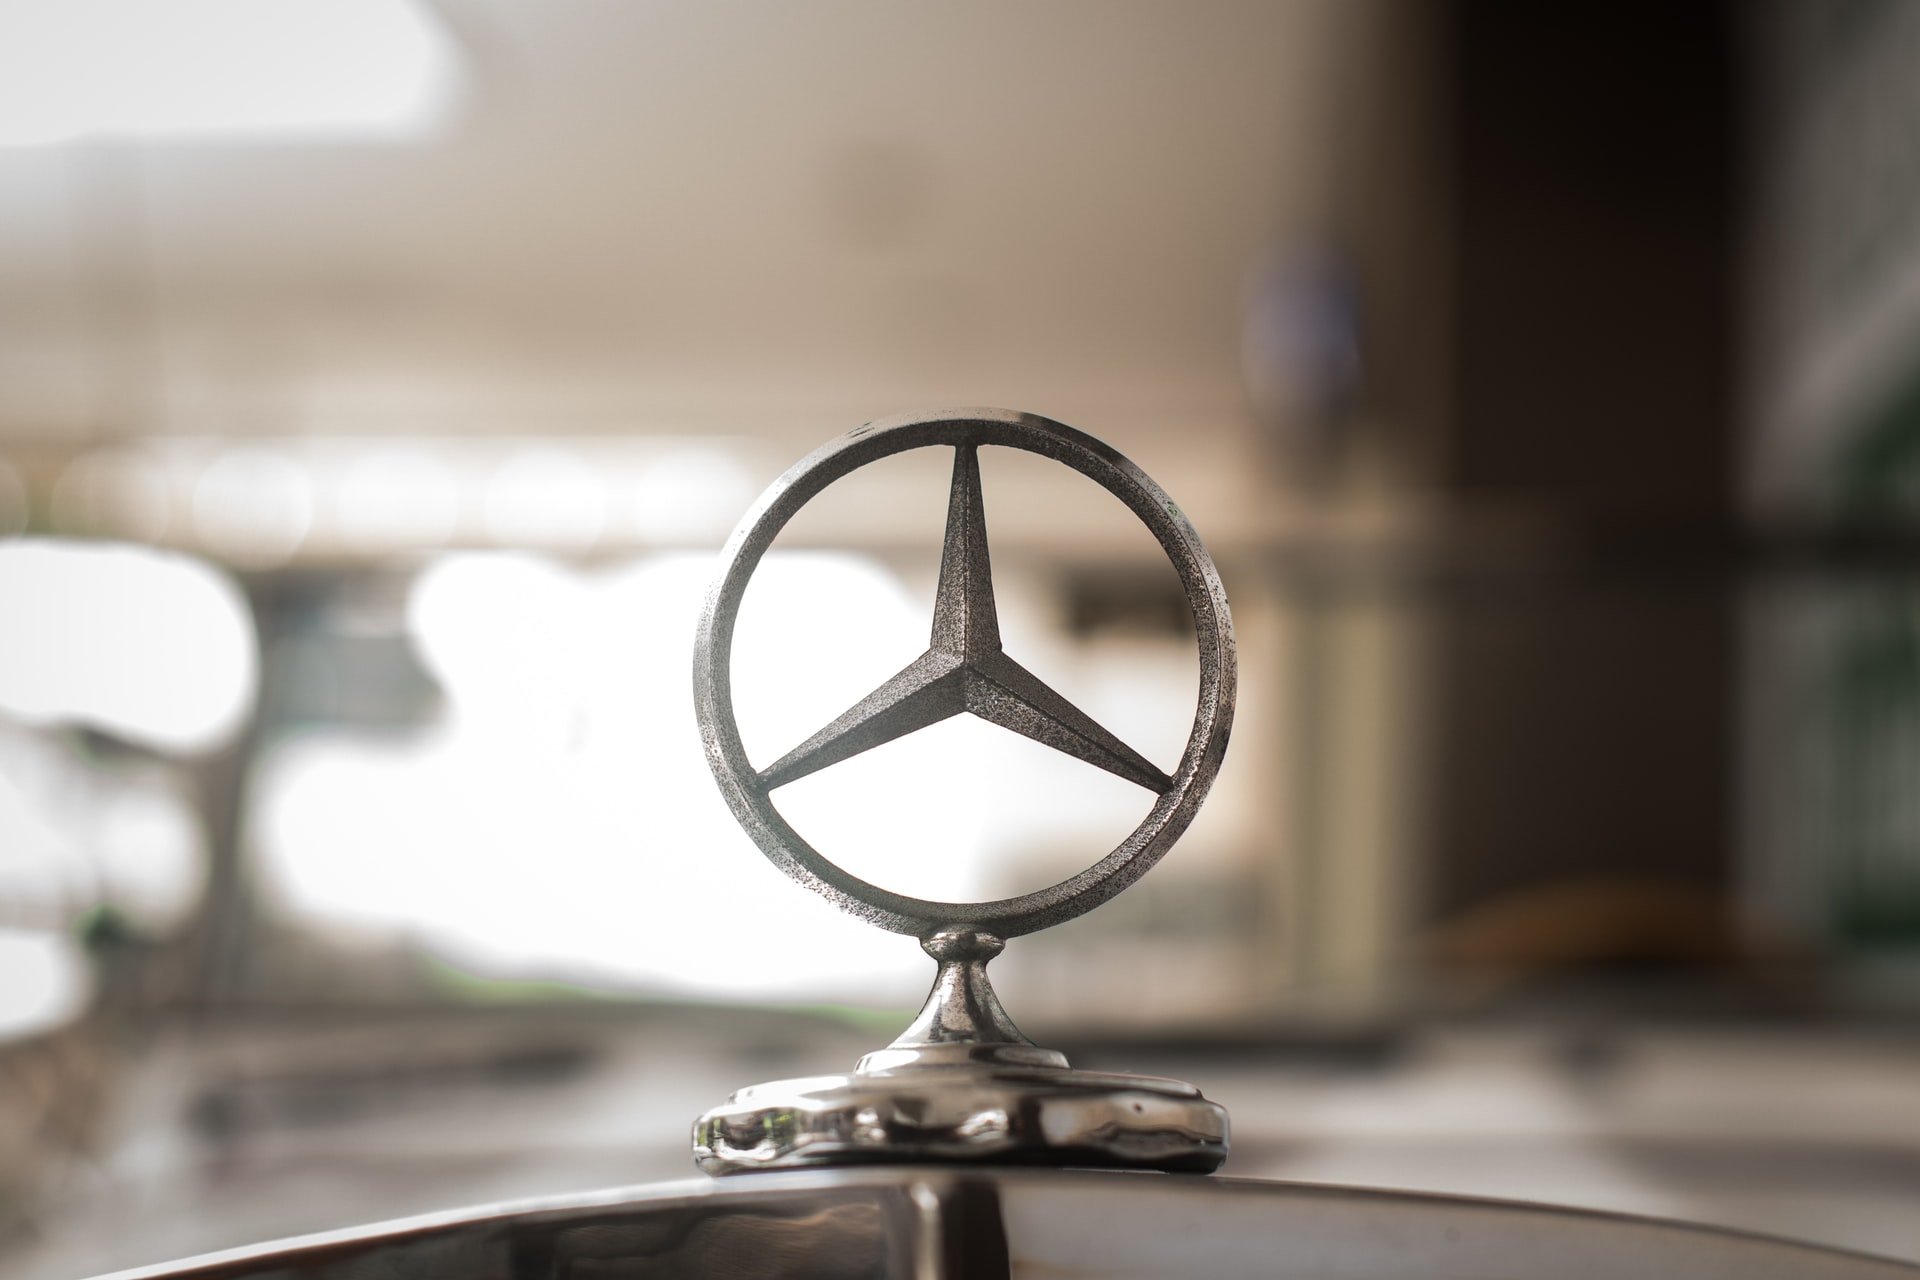 mercedes-benz data breach exposes ssns, credit card numbers